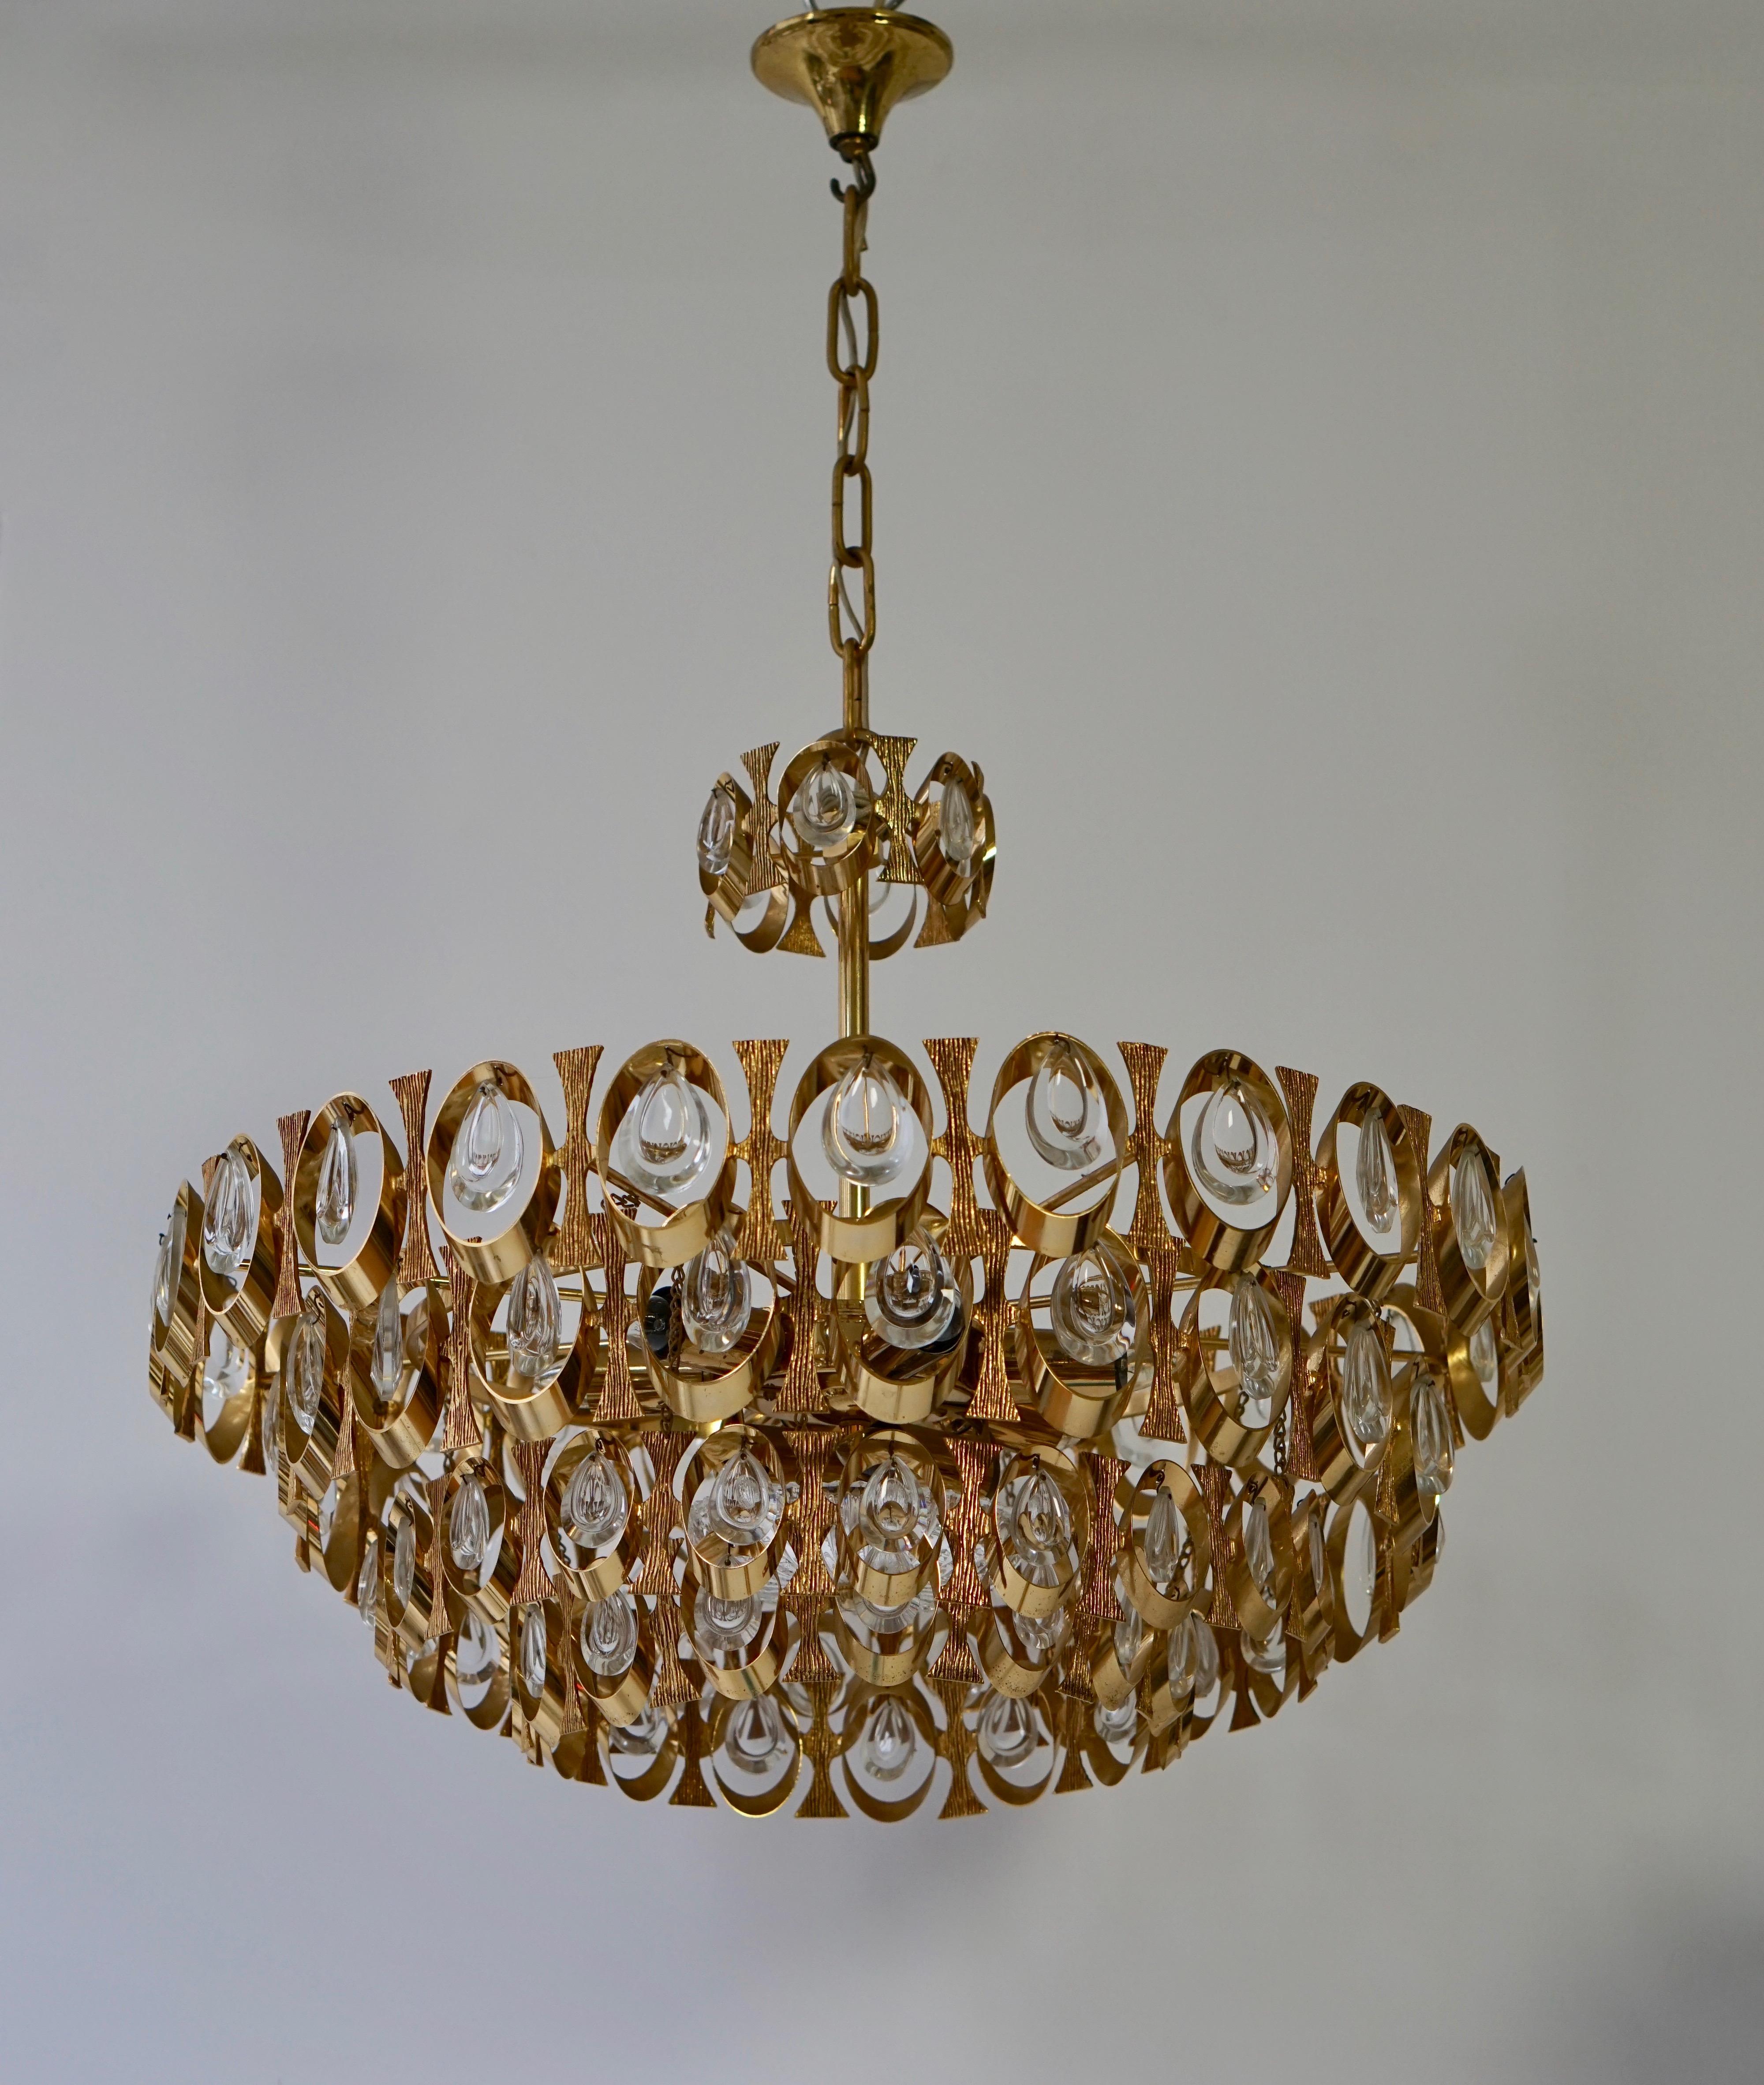 Unique eight-light chandelier with gilt brass beautifully shaped rings and plates. Its truly amazing with all it's crystal prisms excellent condition. By Gaetano Sciolari for Palwa. Please note we have several chandelier in similar style and